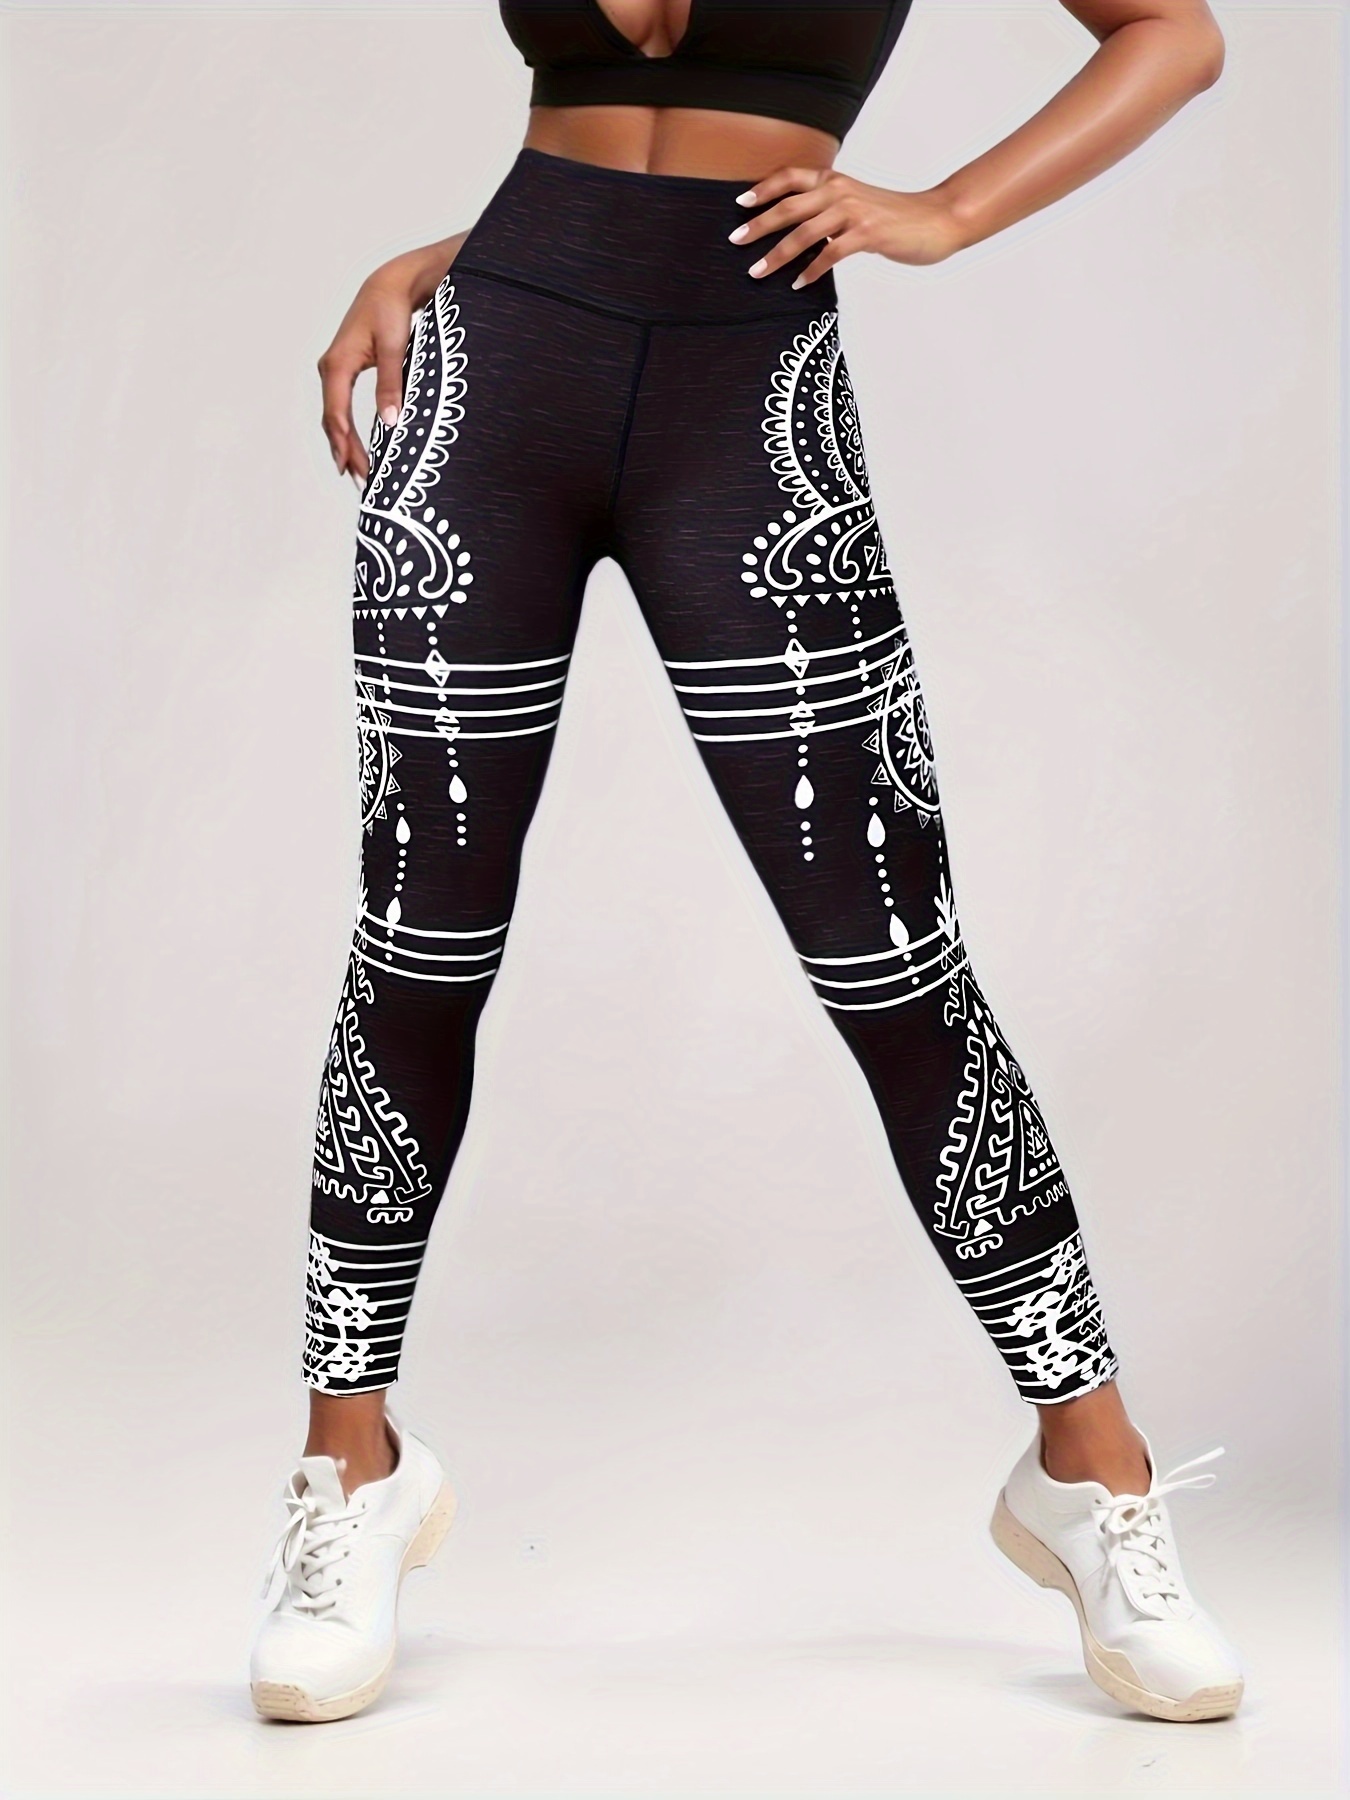 Paisley Print Boho Style High Waist Stretchy Sports Tight Pants, Slimming  Yoga Fitness Workout Gym Exercise Leggings, Women's Activewear